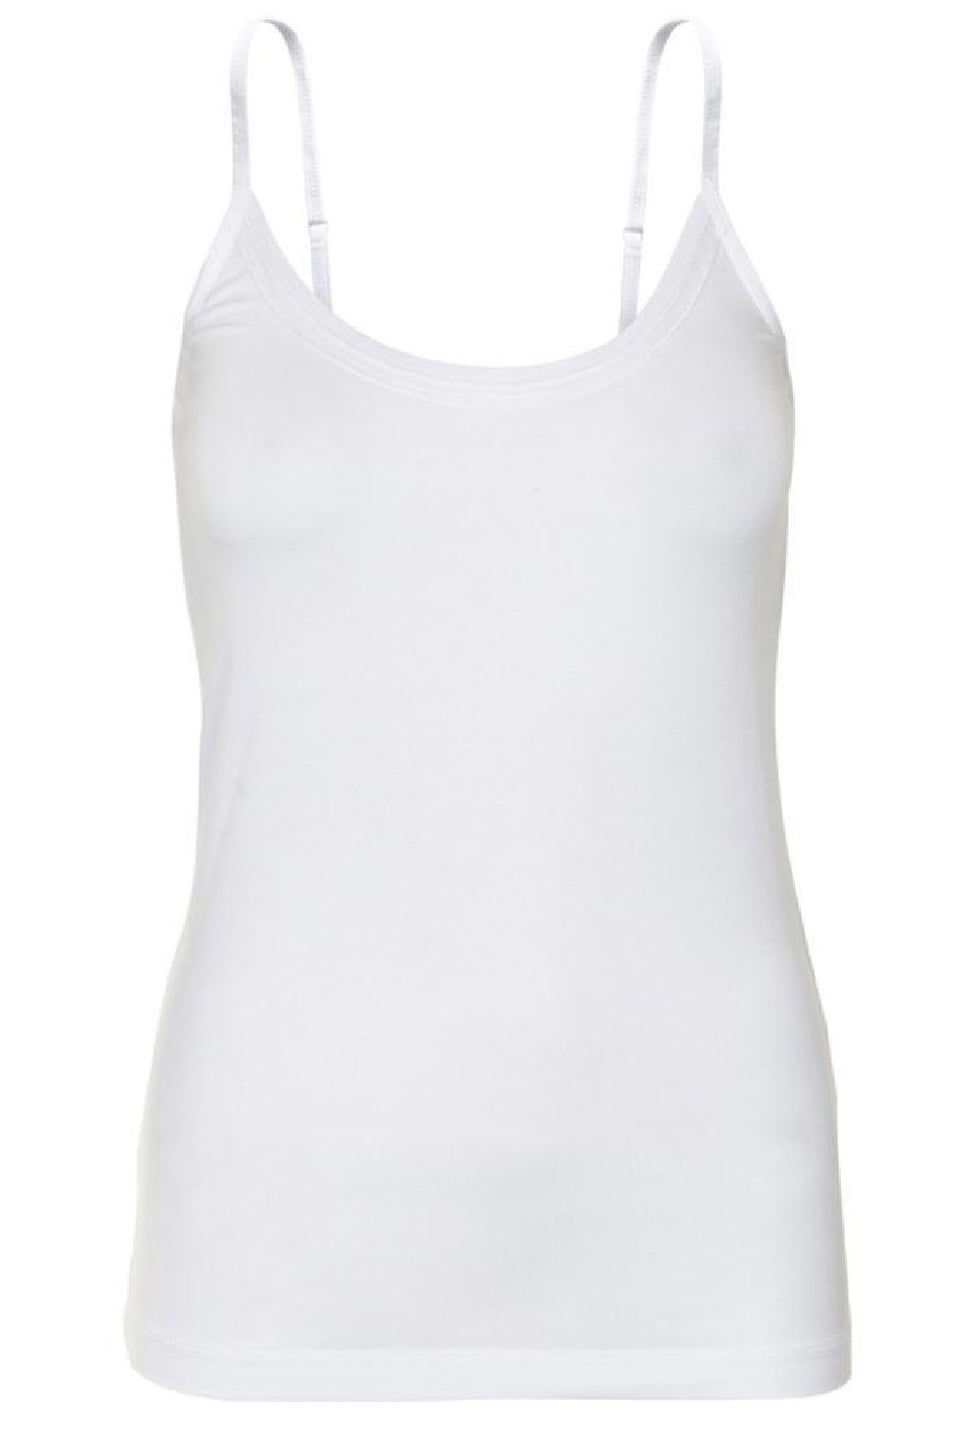 Inwear Finesse white spaghetti strap cami tank top size S small - $15 (83%  Off Retail) - From J